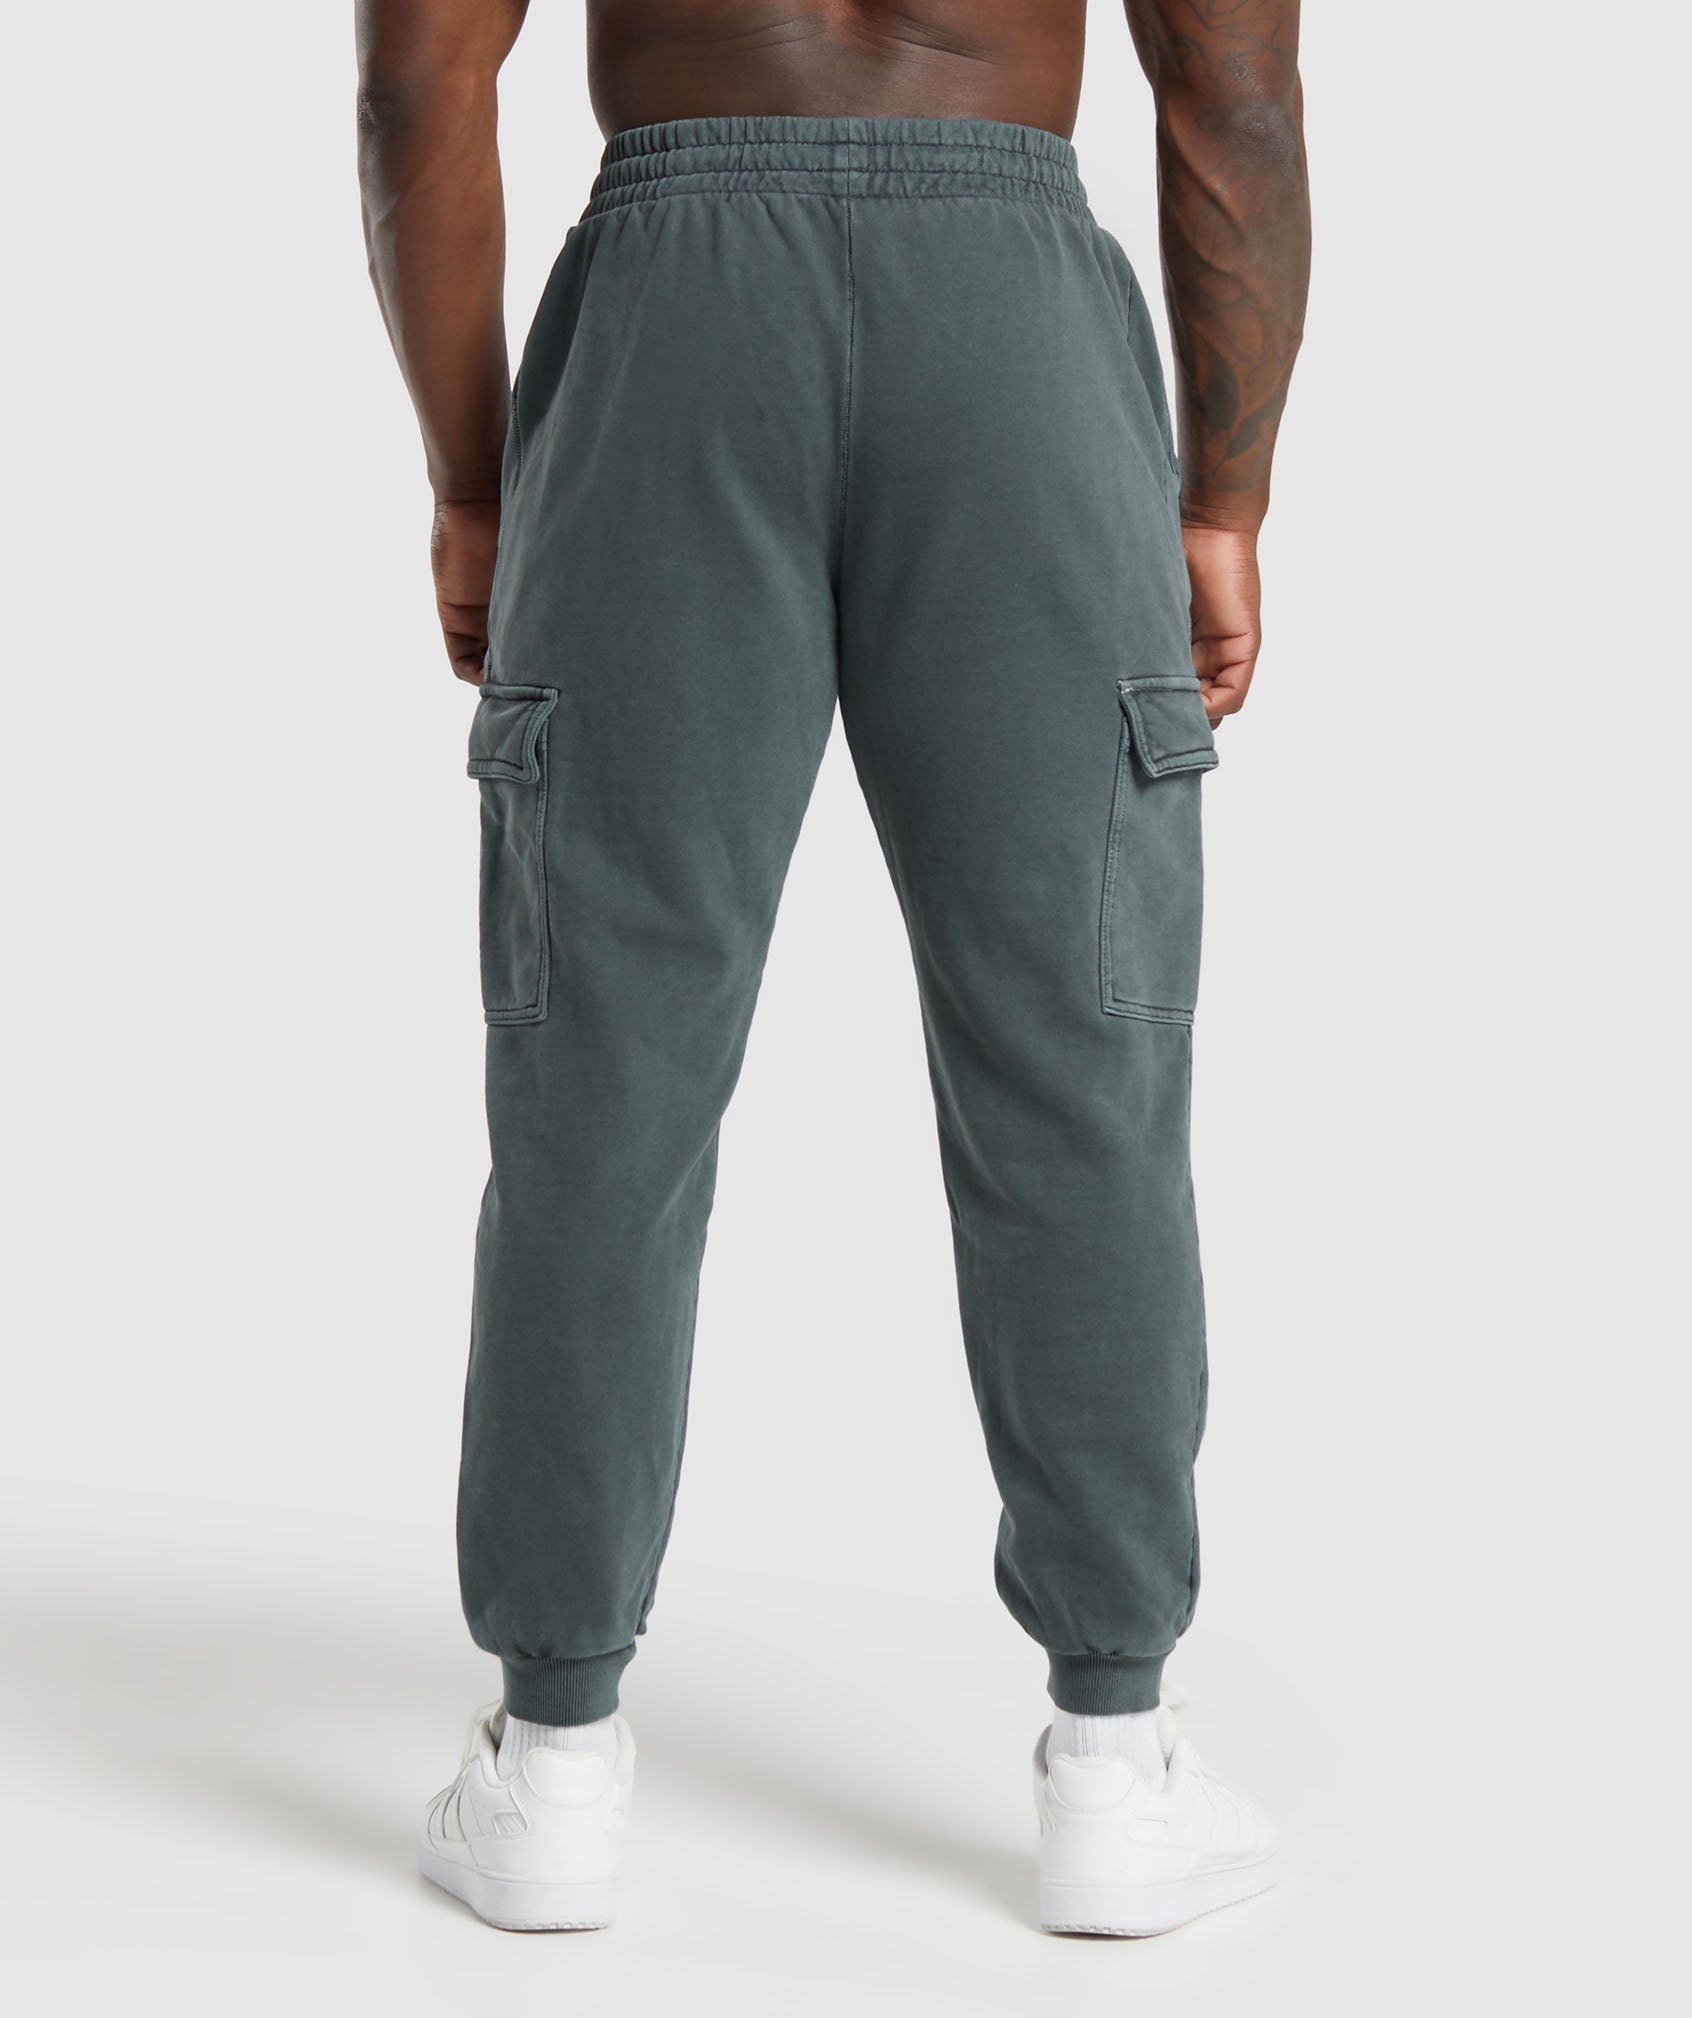 Premium Legacy Cargo Pants in Cargo Teal - view 2